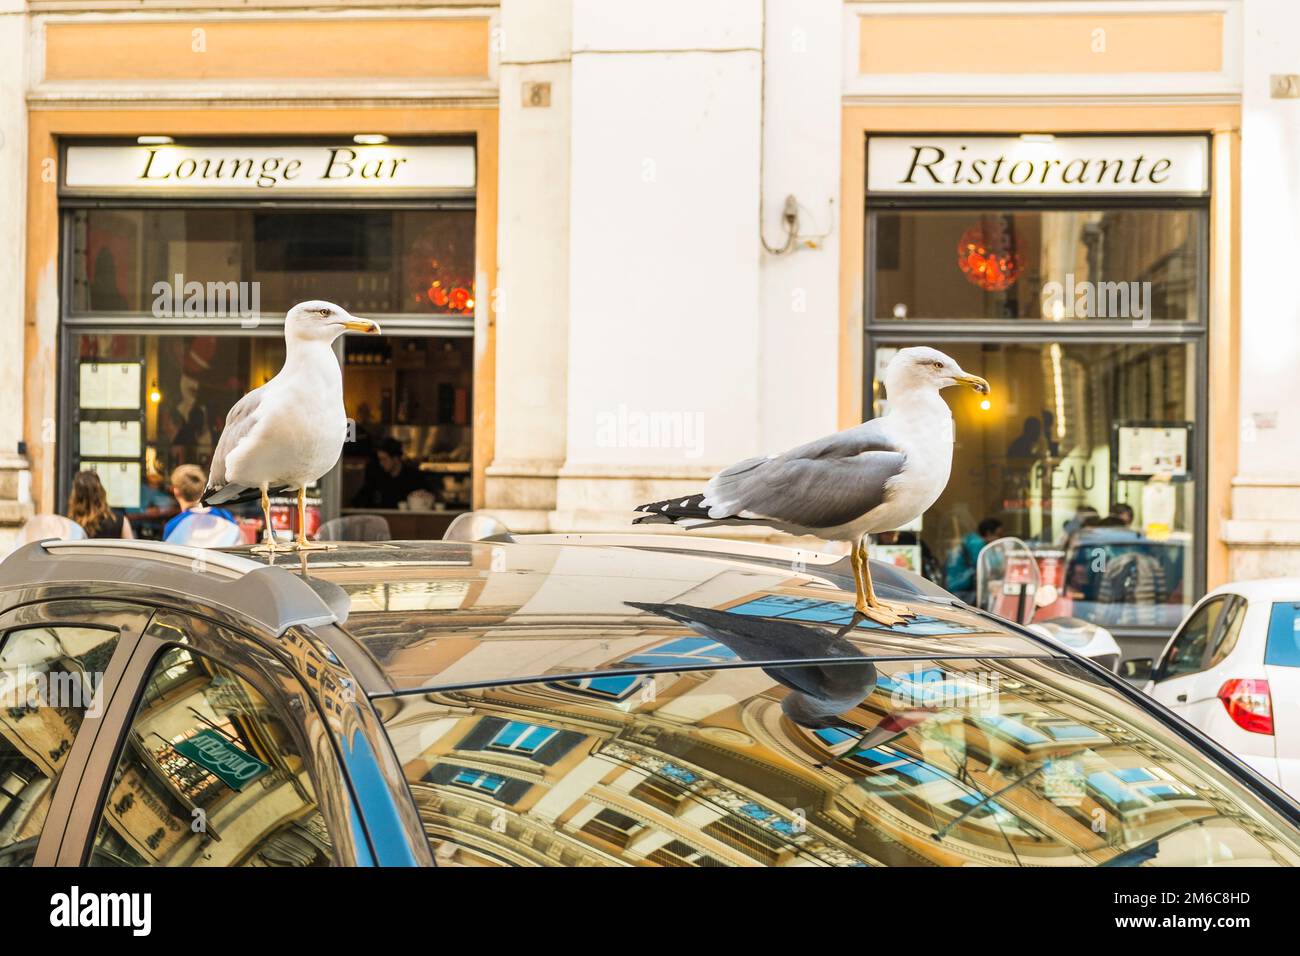 Seagulls on the roof of a car, restaurant, lounge bar in background Stock Photo